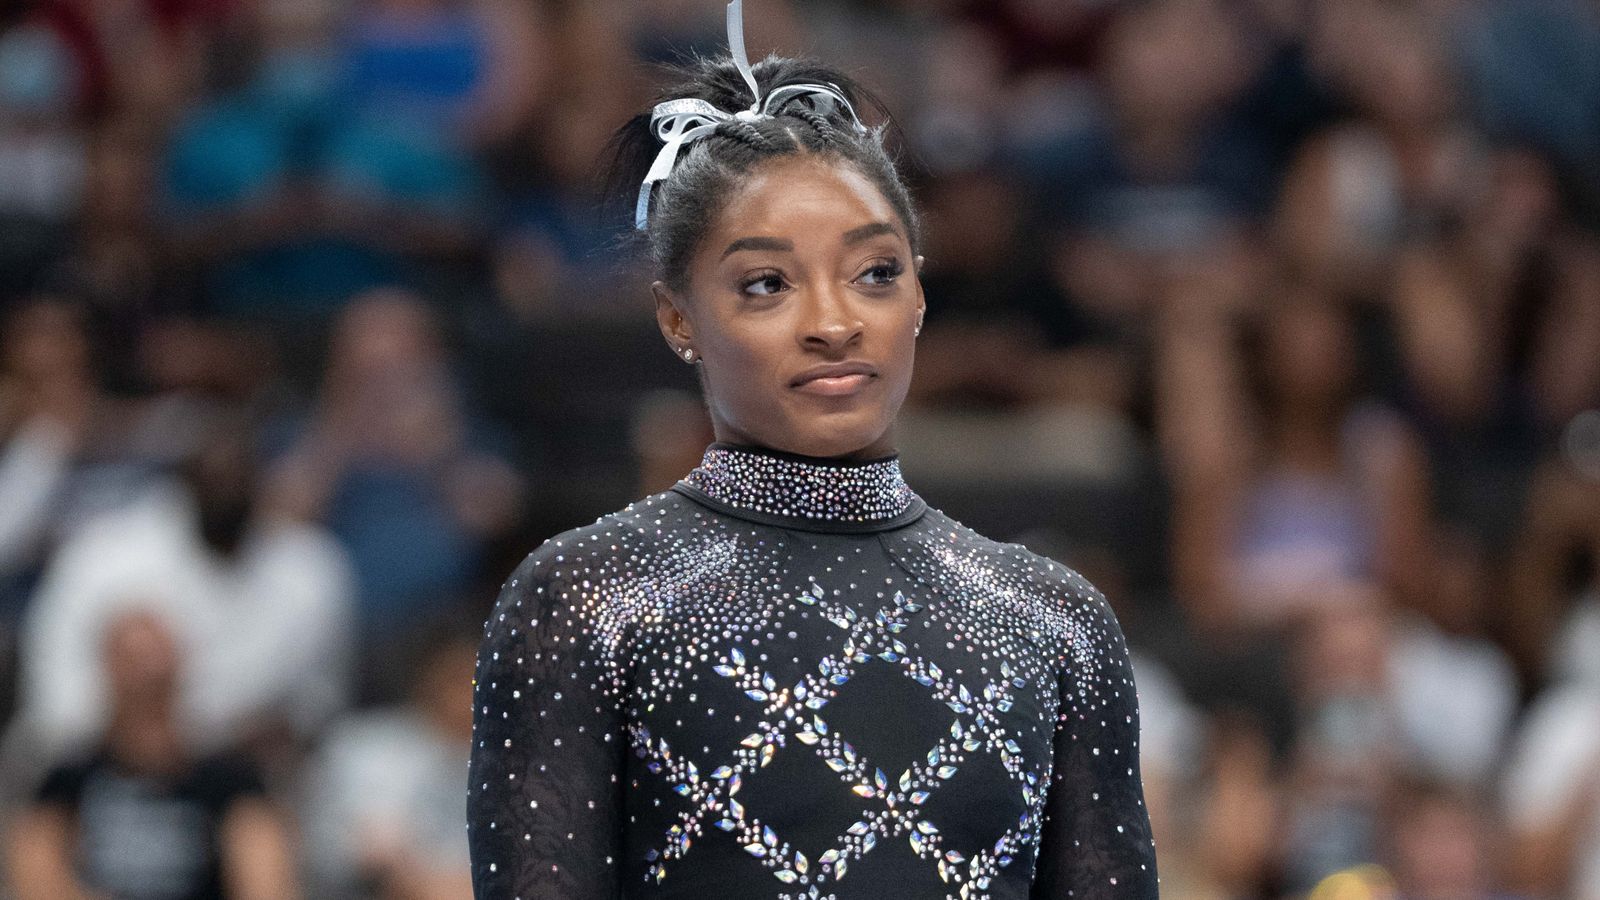 Gymnastics Ireland 'deeply sorry' after Simone Biles criticism over black girl snubbed at medal ceremony